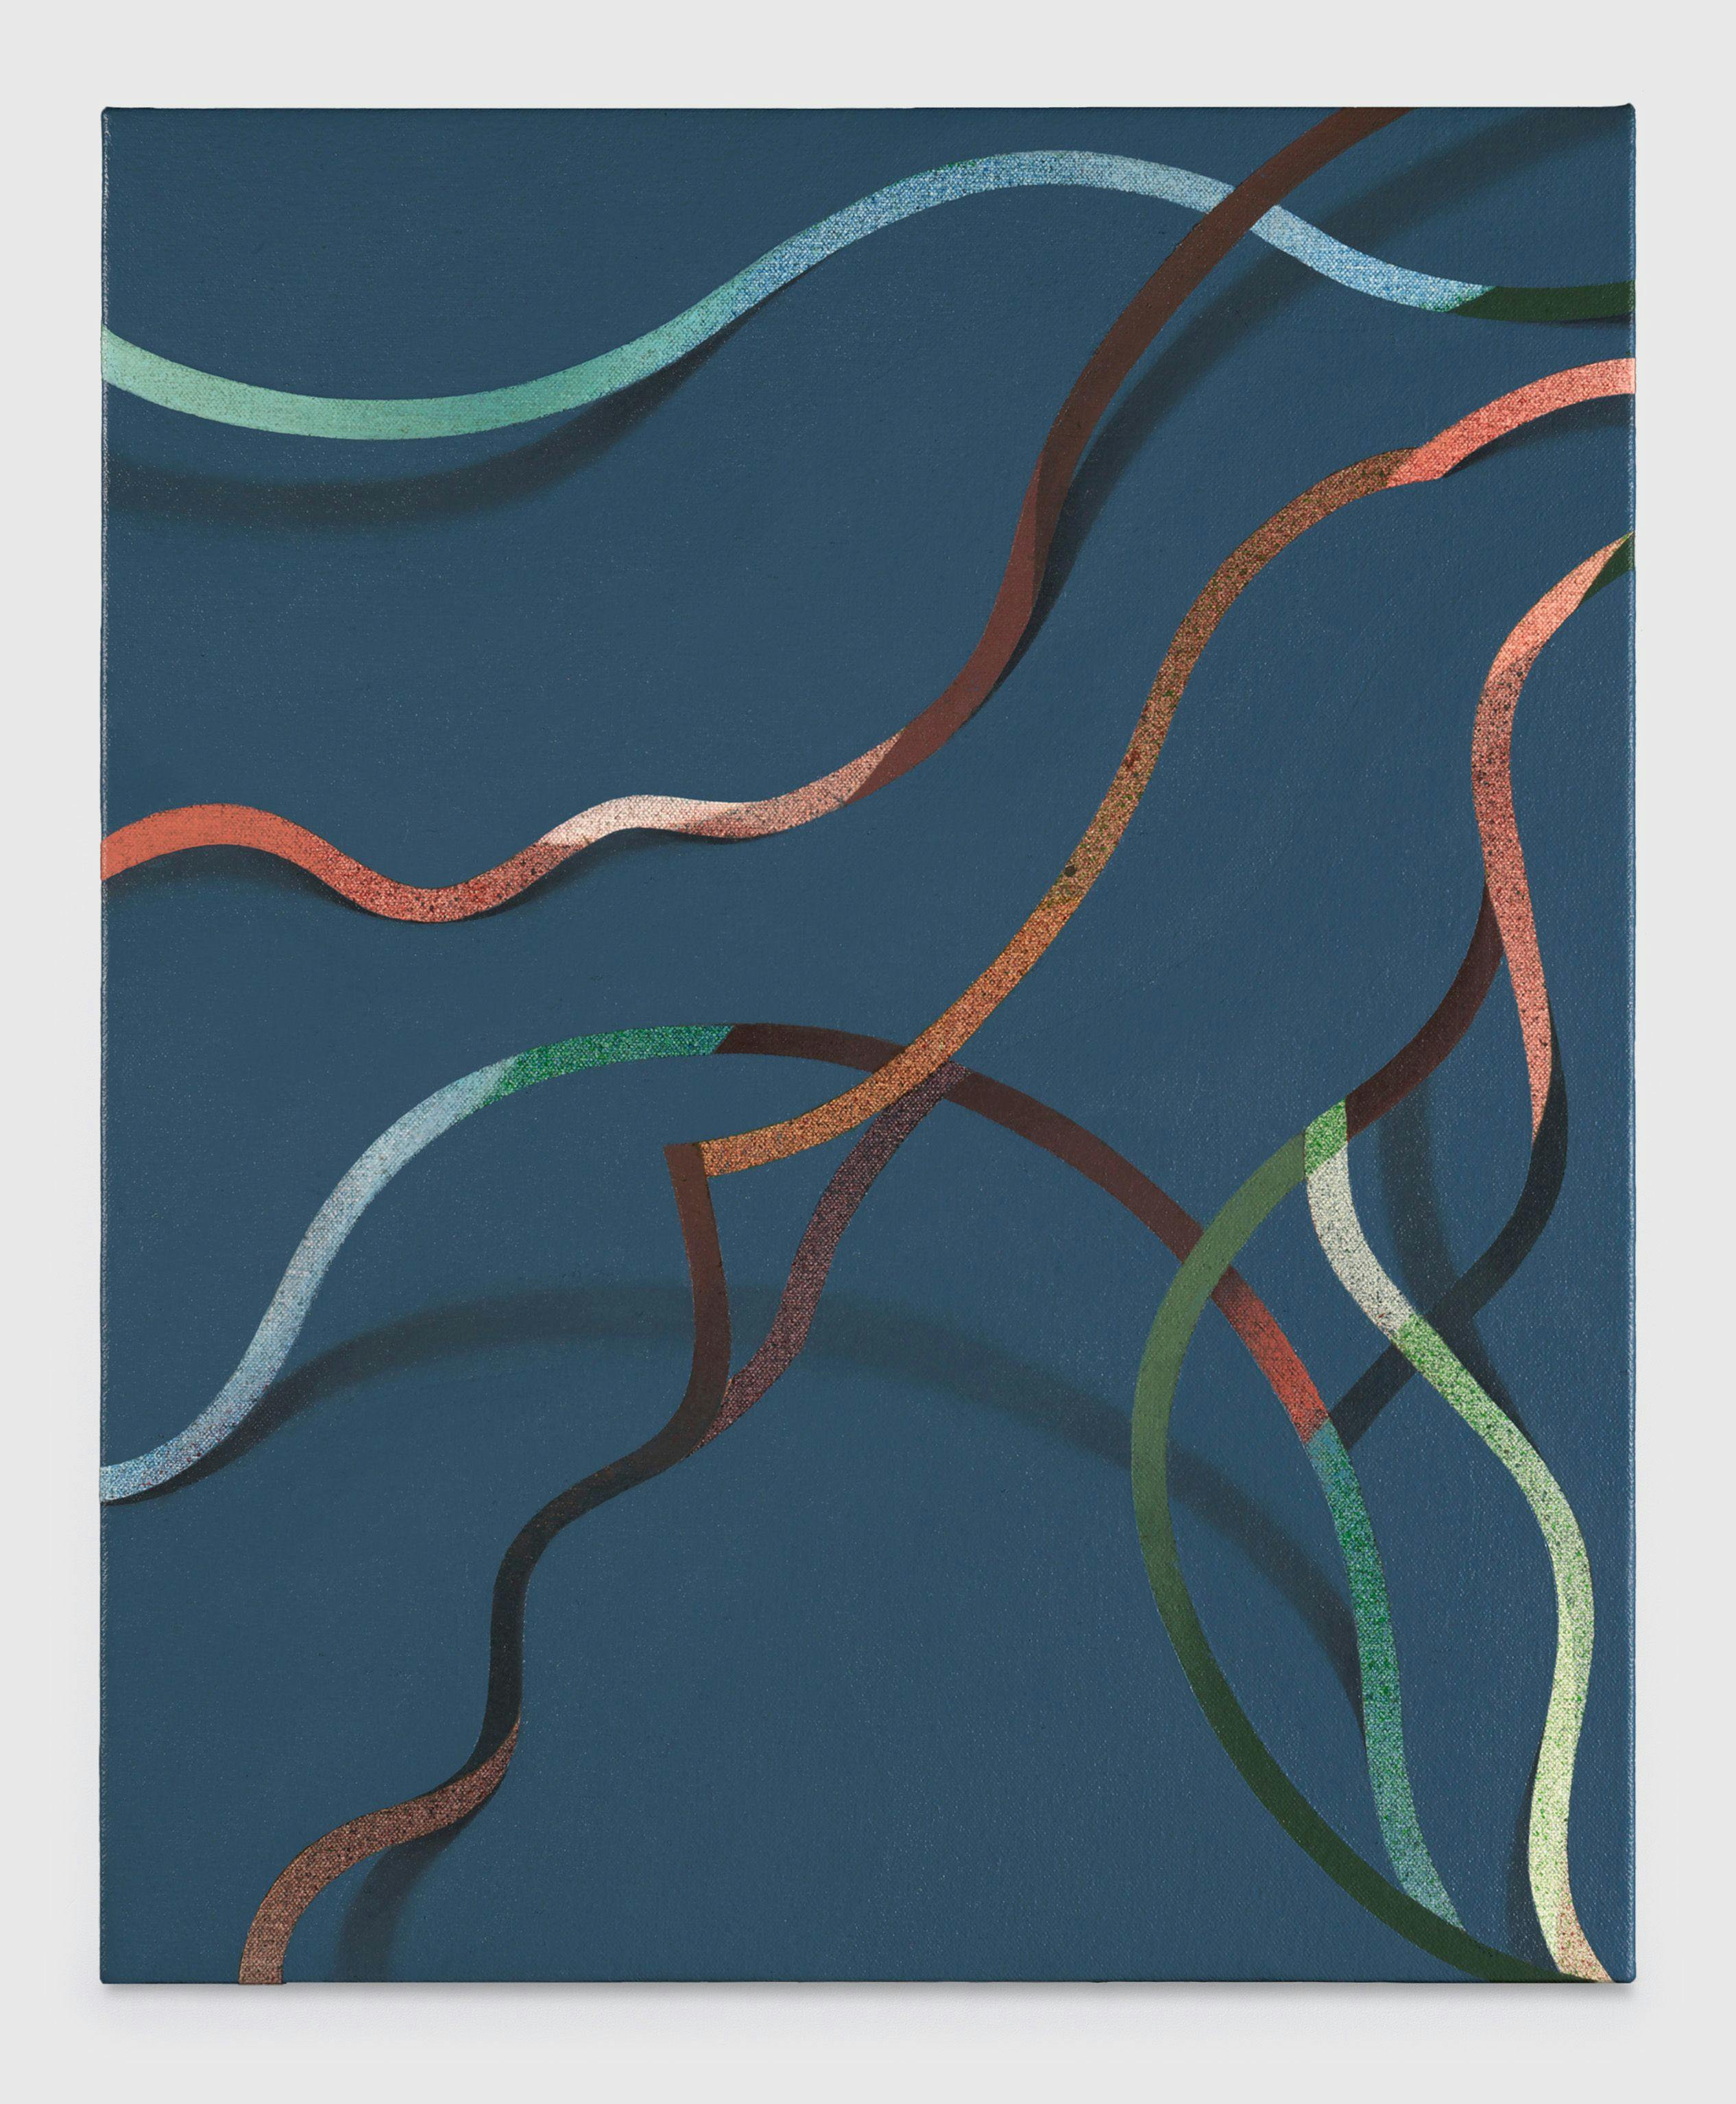 A painting by Tomma Abts, titled Saeben, dated 2019.